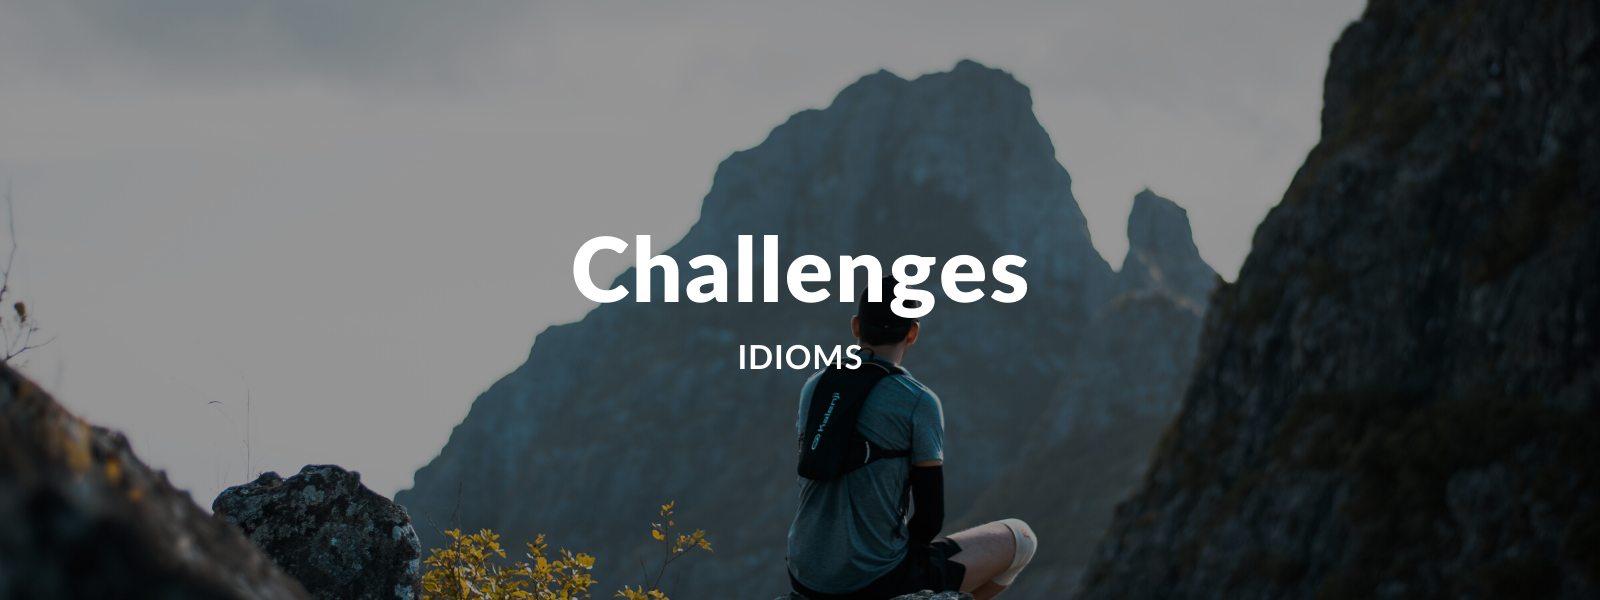 Talaera Business Idioms Challenges